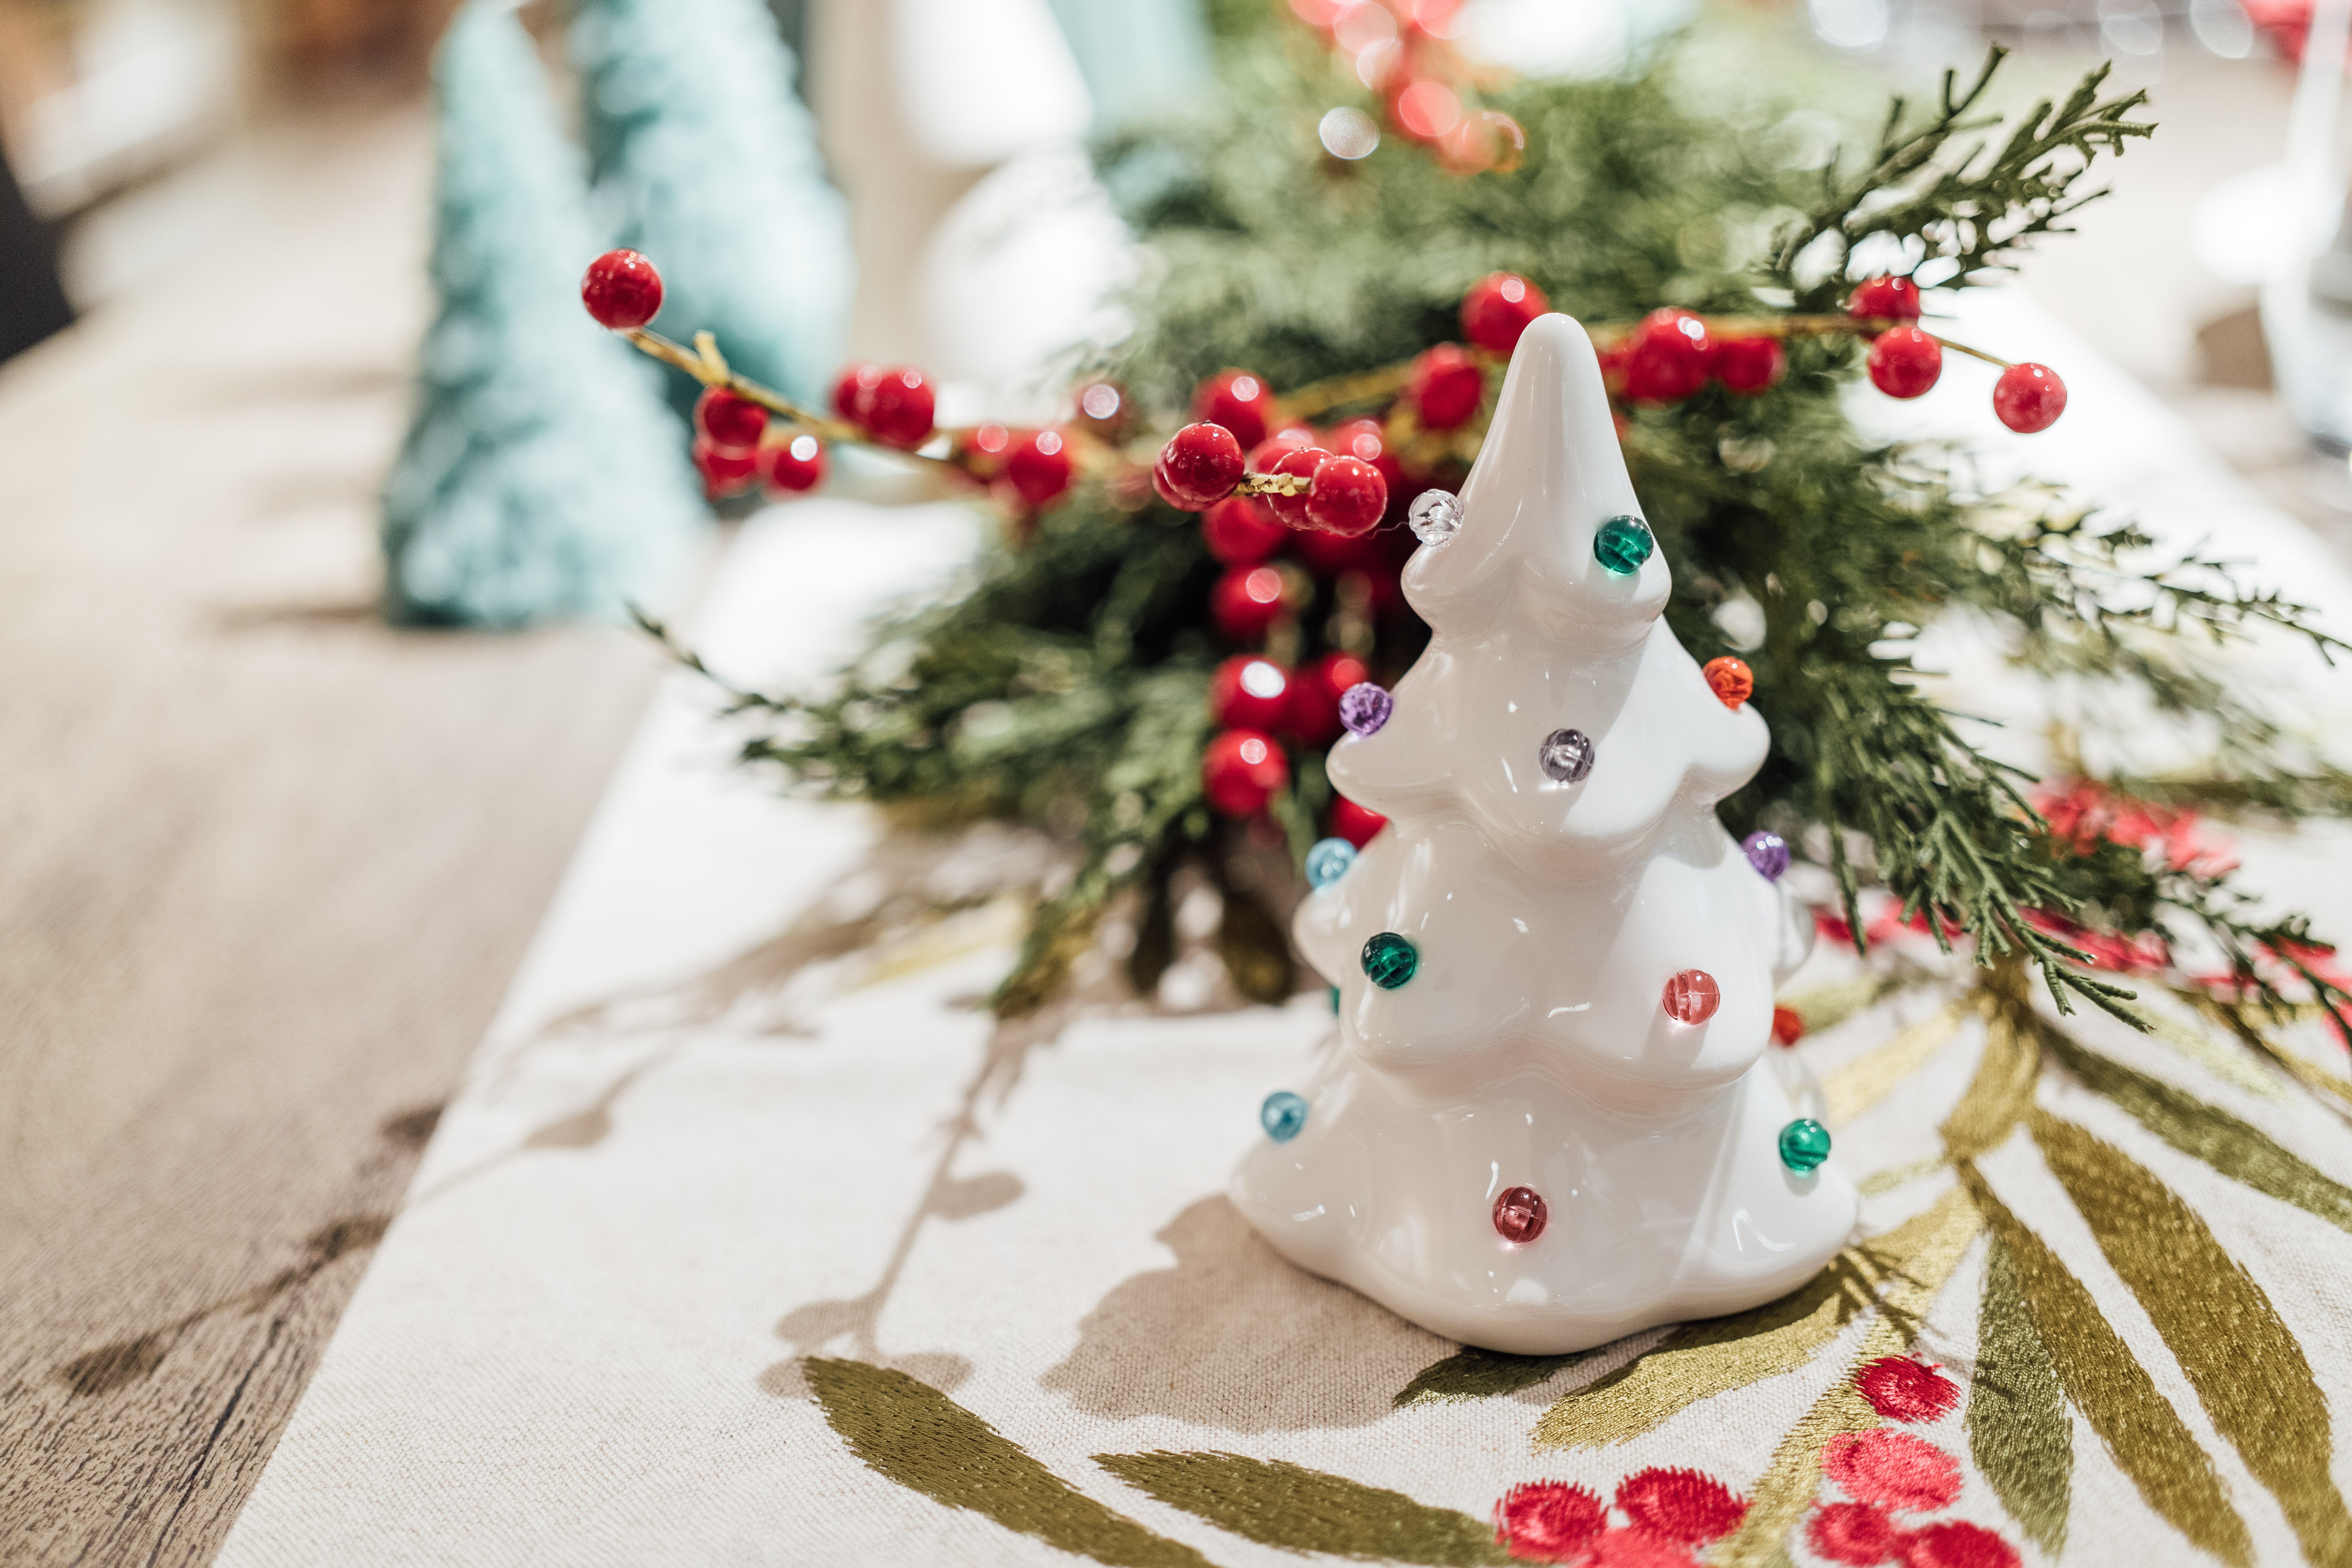 Most Americans agree — Christmas decorations go up way too early ...